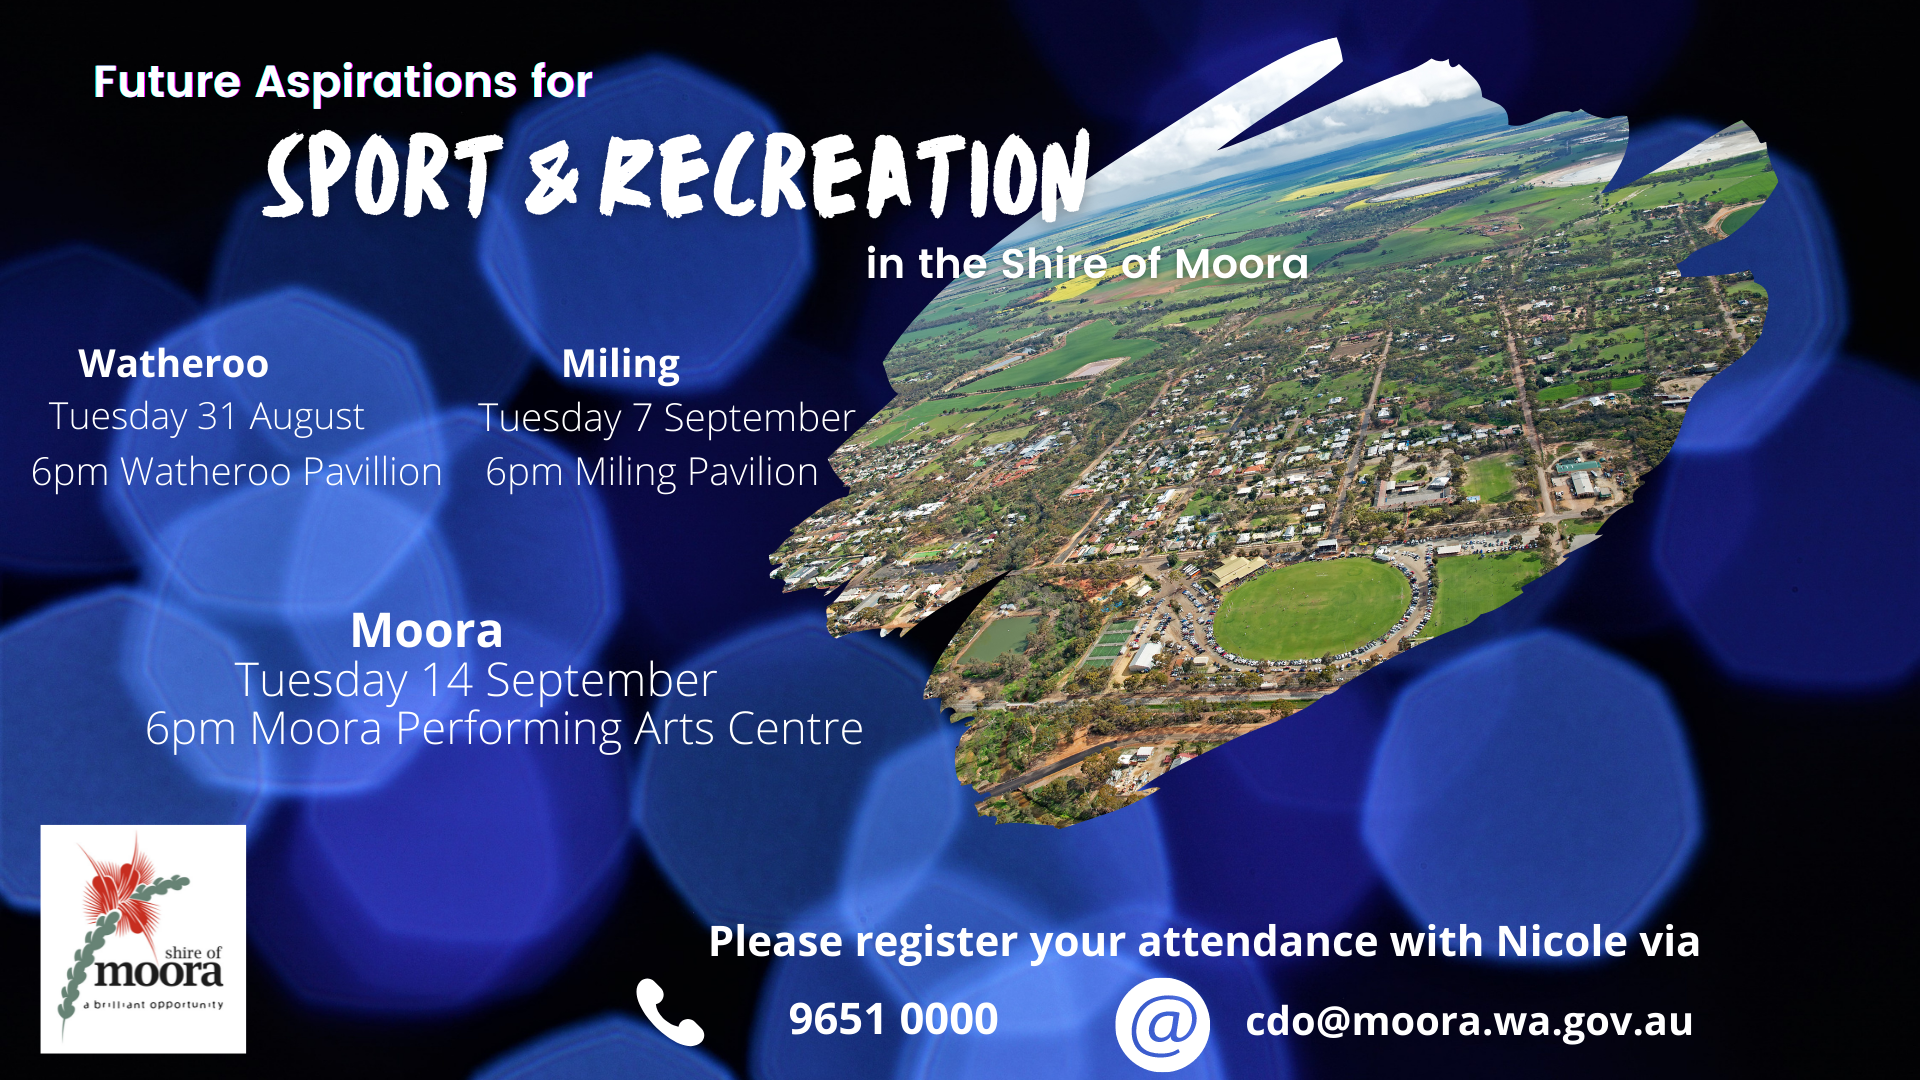 Future Aspirations for Sport and Recreation in the Shire of Moora